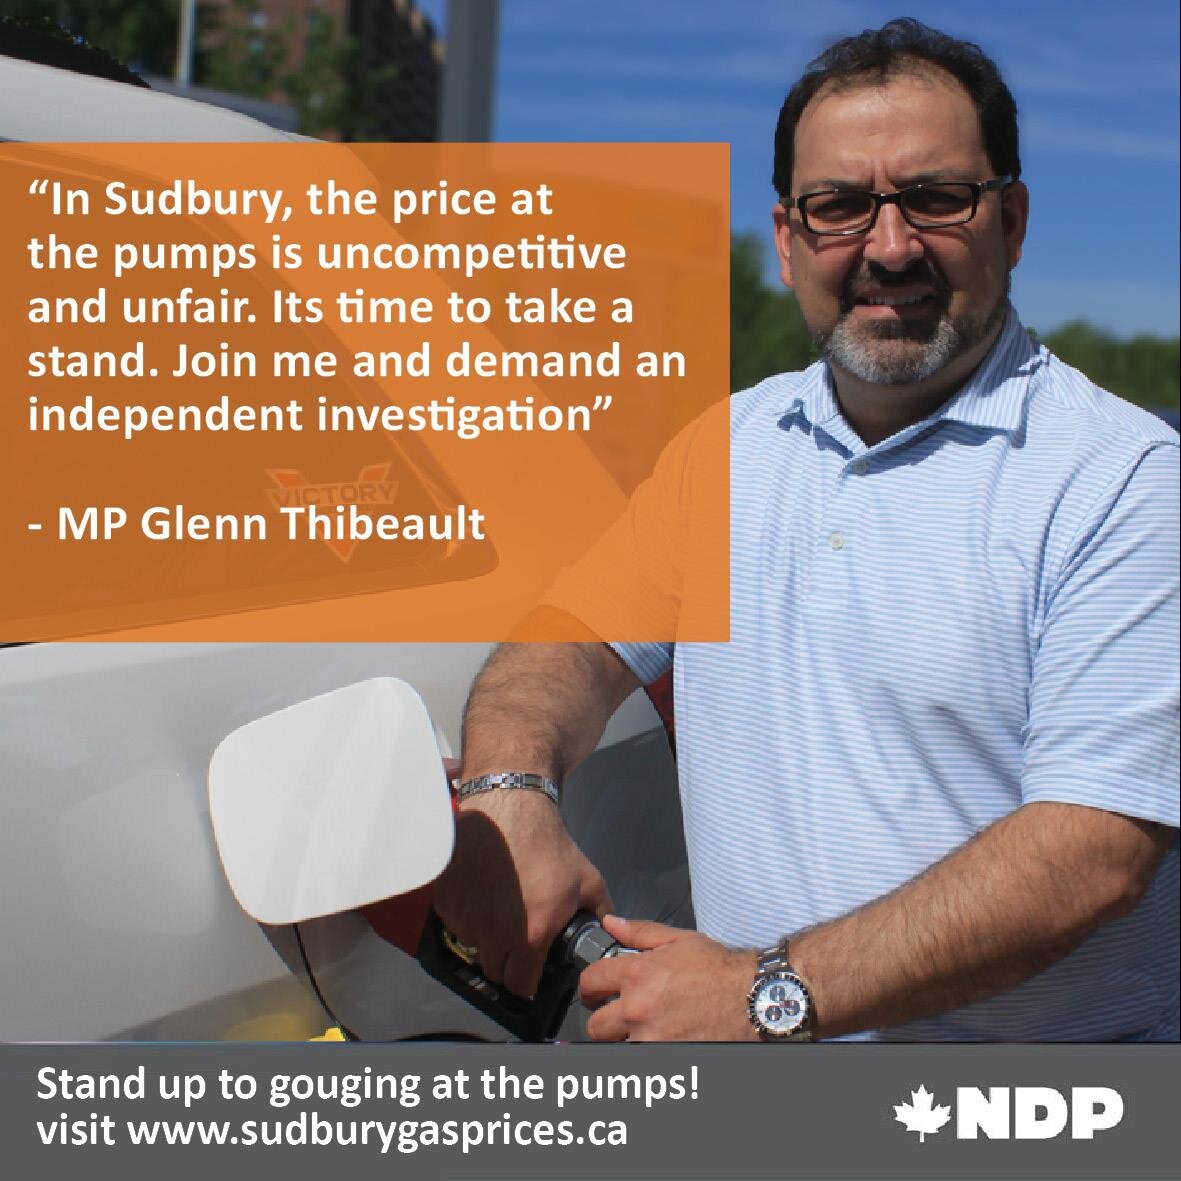 Join the campaign to ensure gas price fairness at http://t.co/fyPMcDKtrc